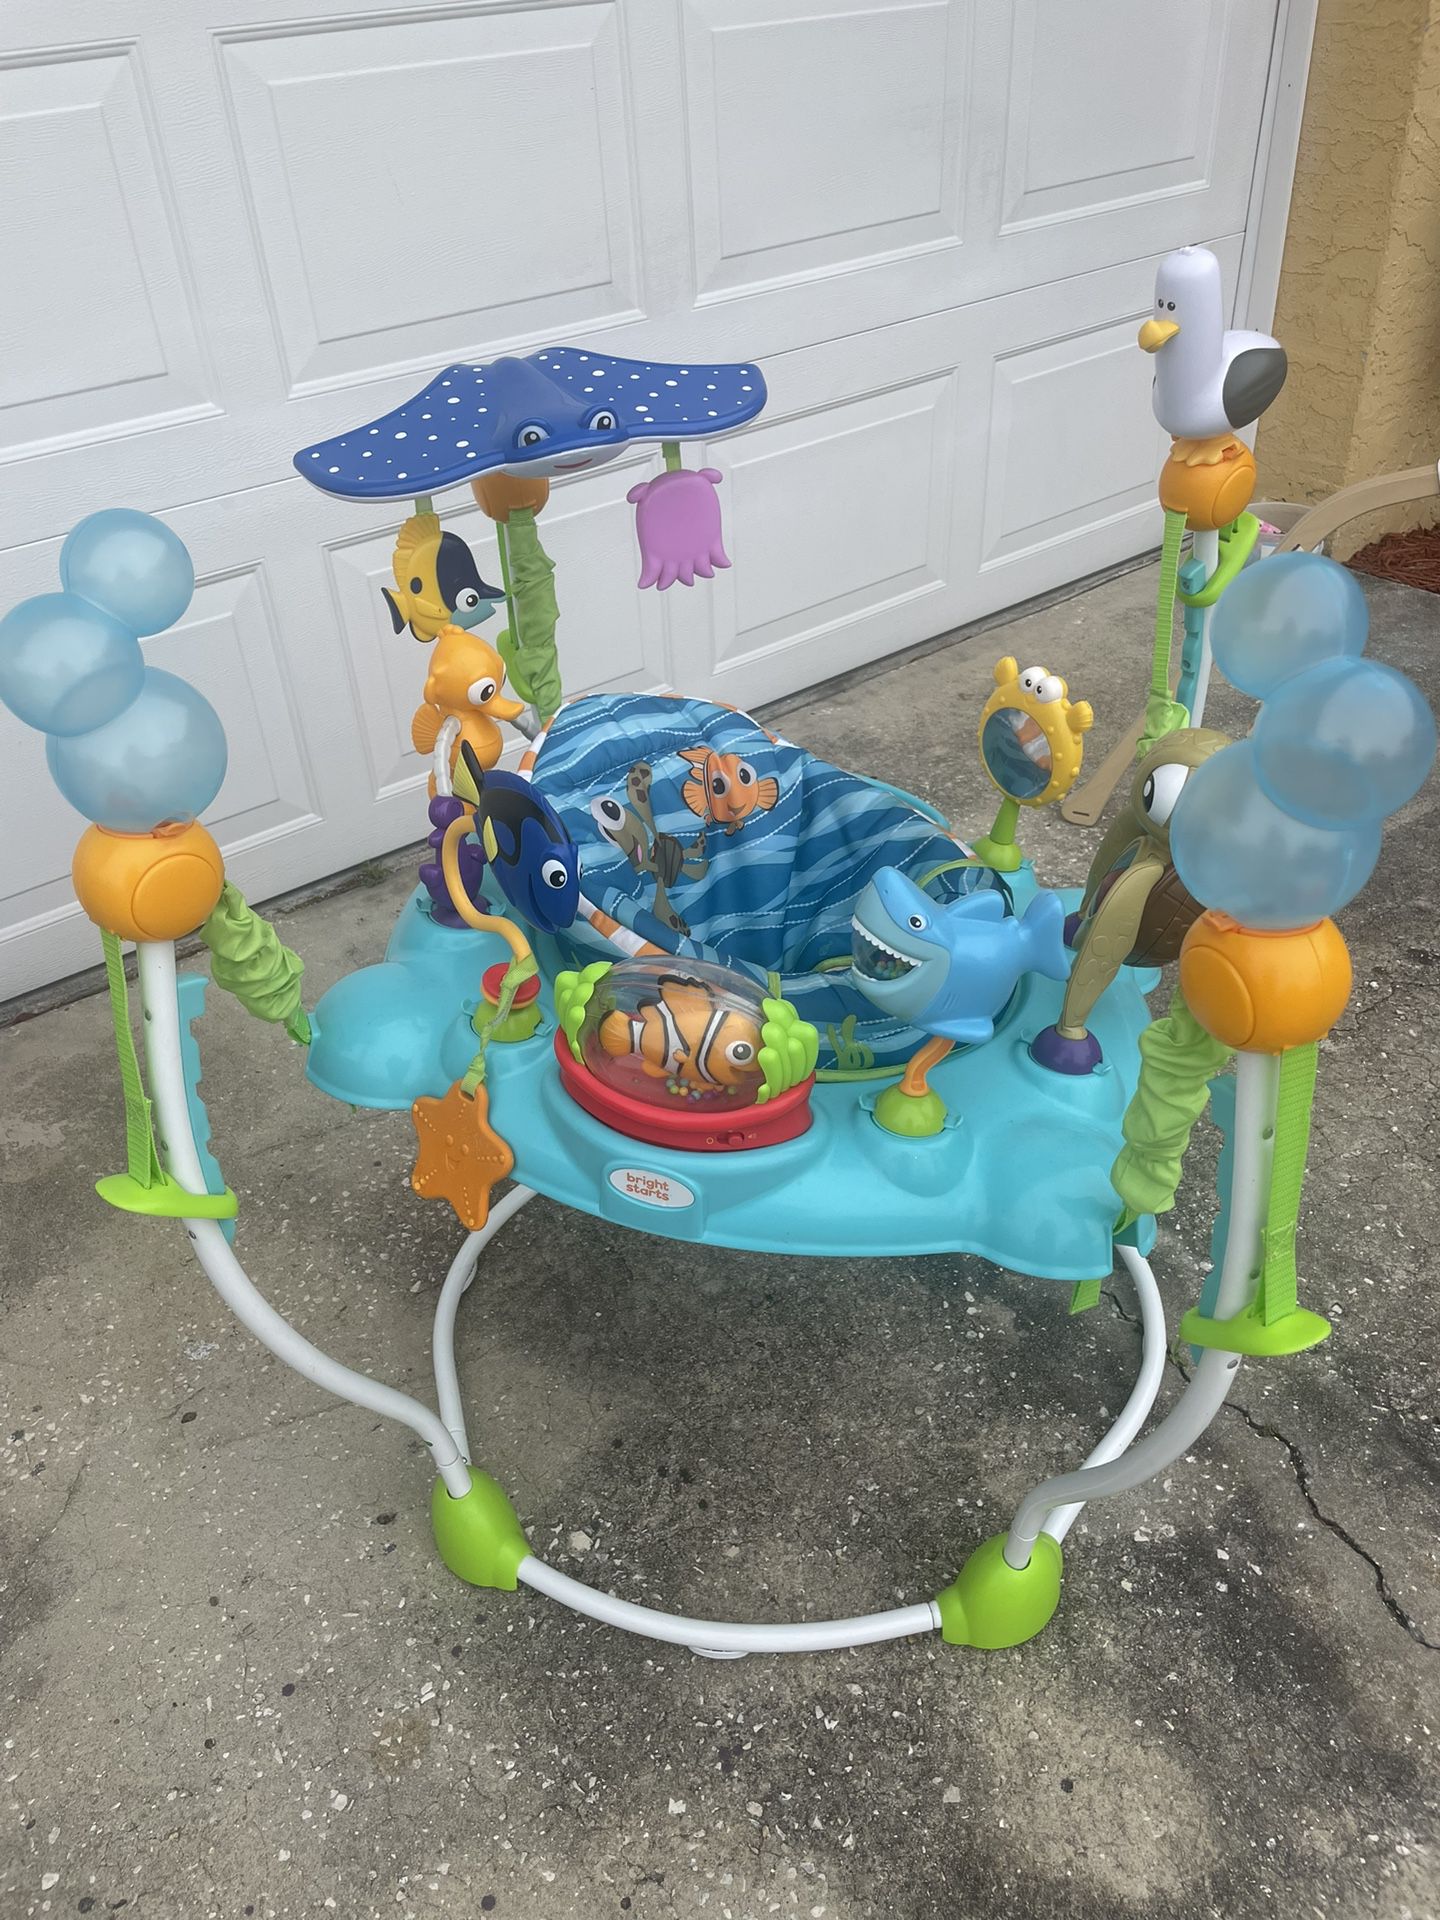 Finding Nemo Jumperoo and Lovevery play gym